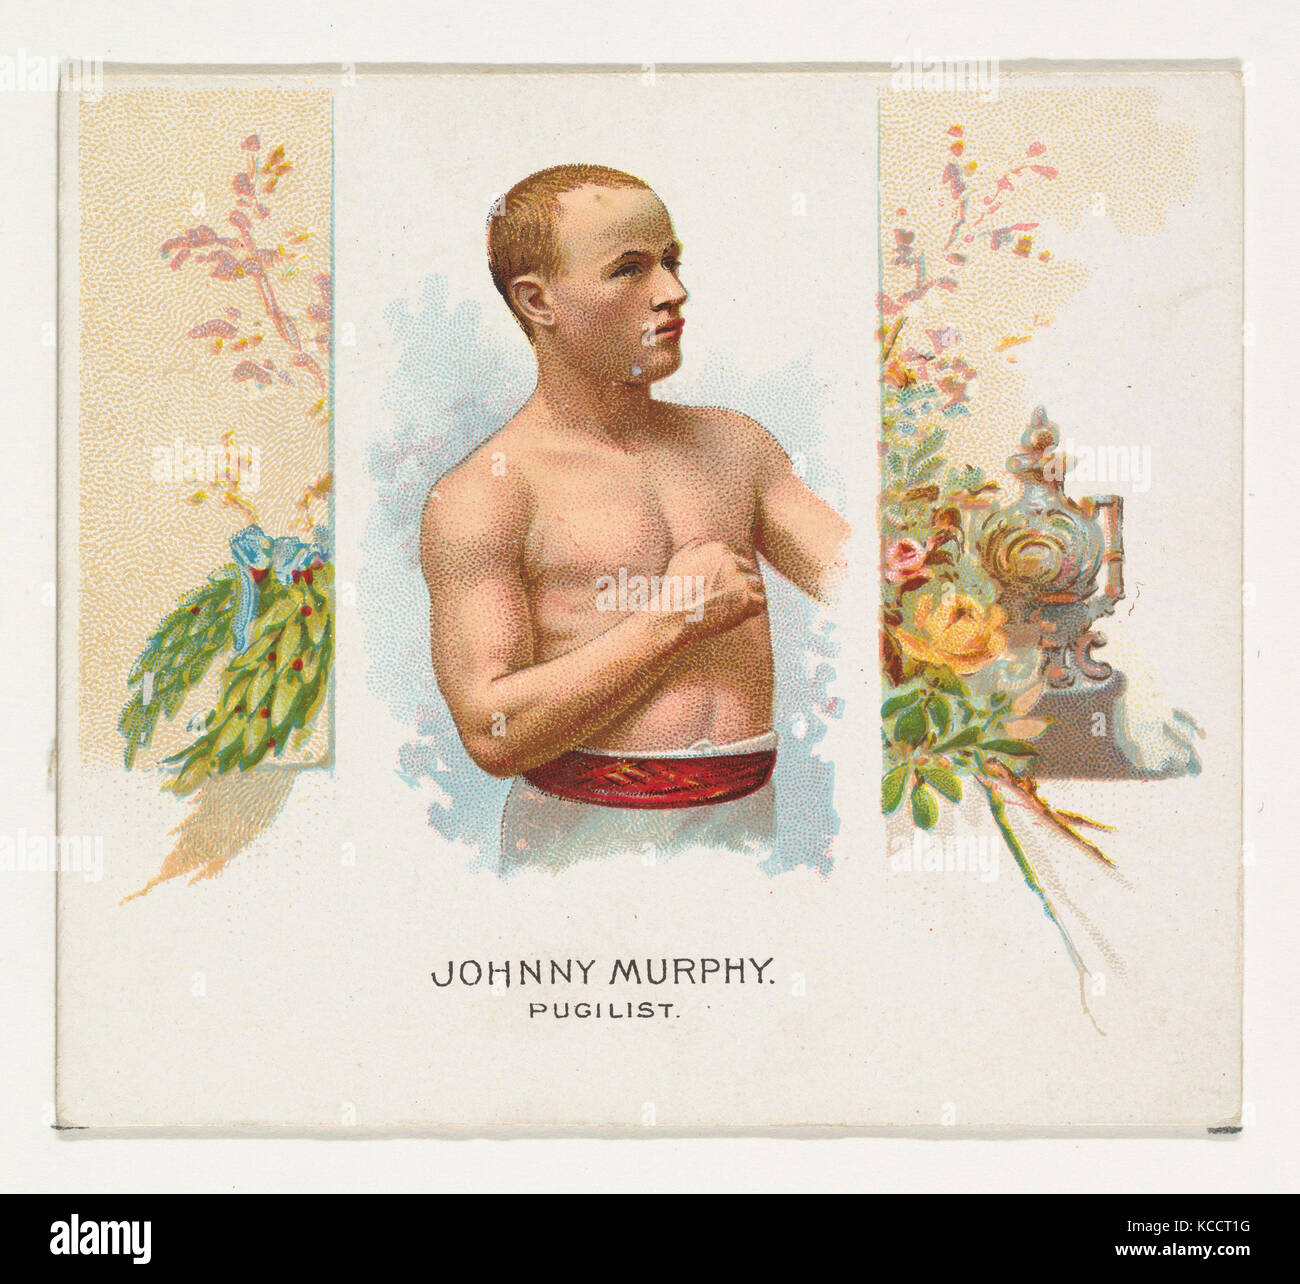 Johnny Murphy, Pugilist, from World's Champions, Second Series (N43) for Allen & Ginter Cigarettes, 1888 Stock Photo